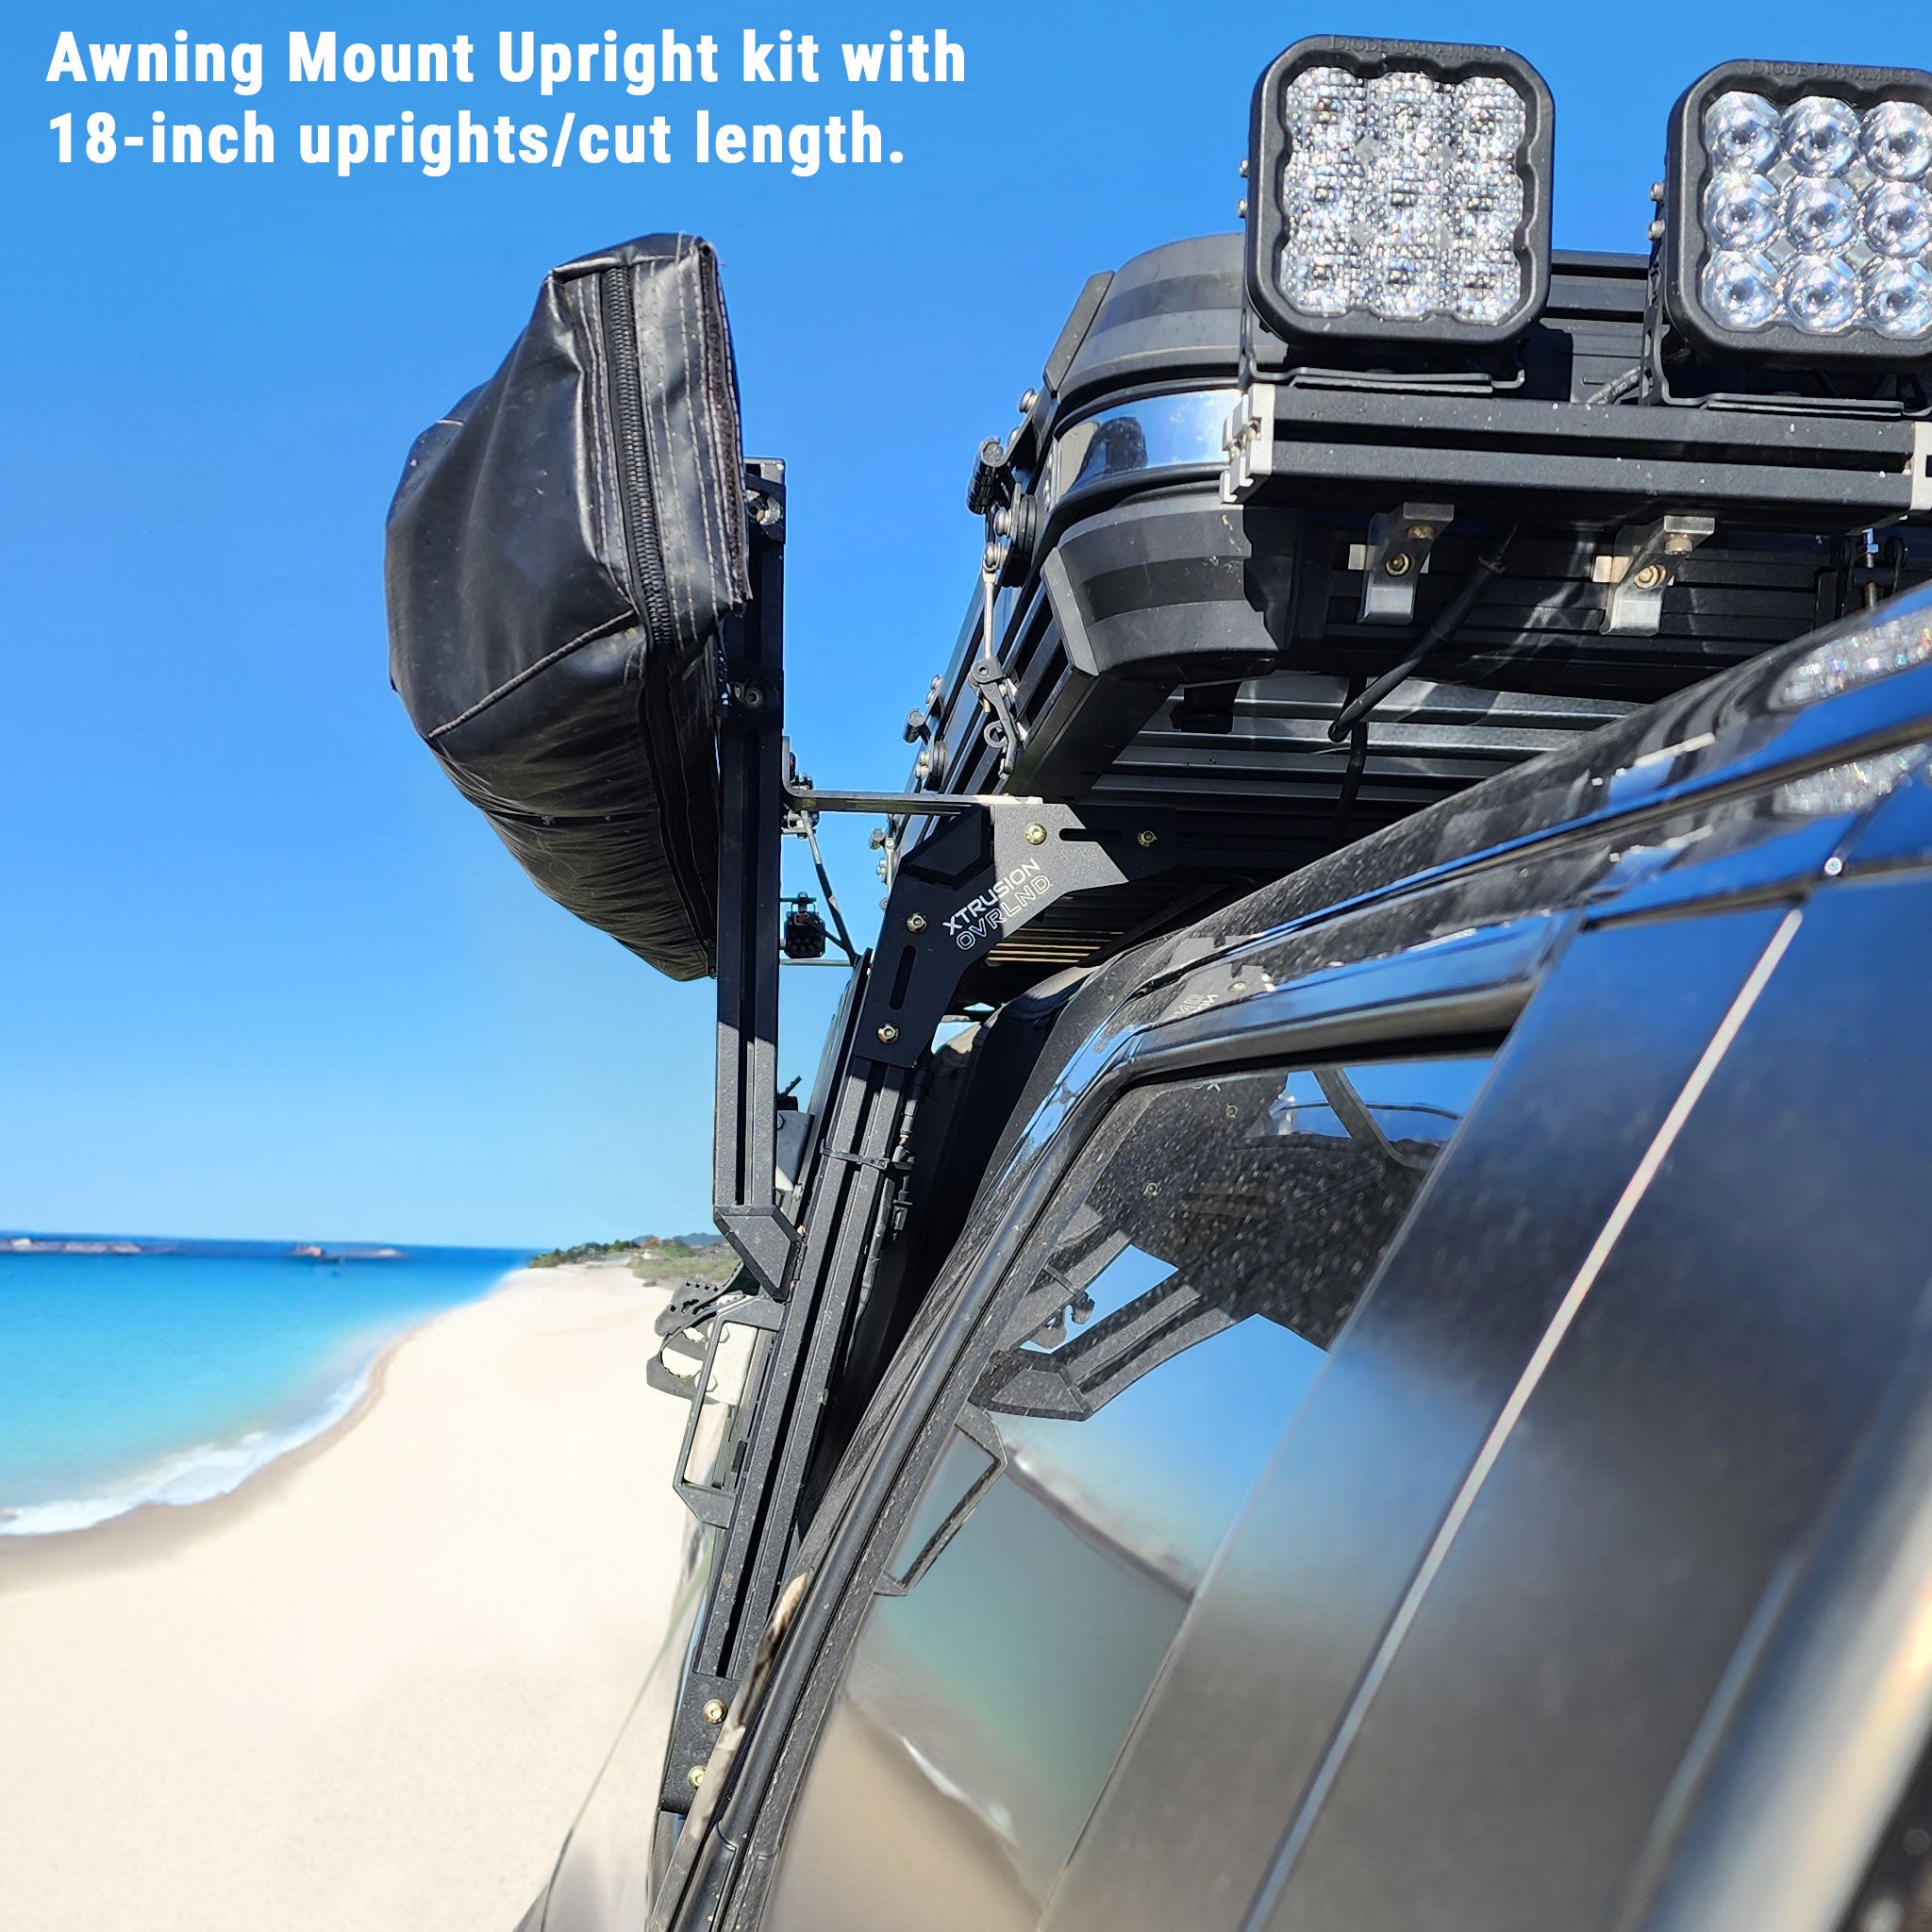 XTR Awning Mount Upright Sub-structure kit with 18-inch uprights, 270 Awning attached and on a full size truck with  13.3 degree angle XTR1 bed rack.